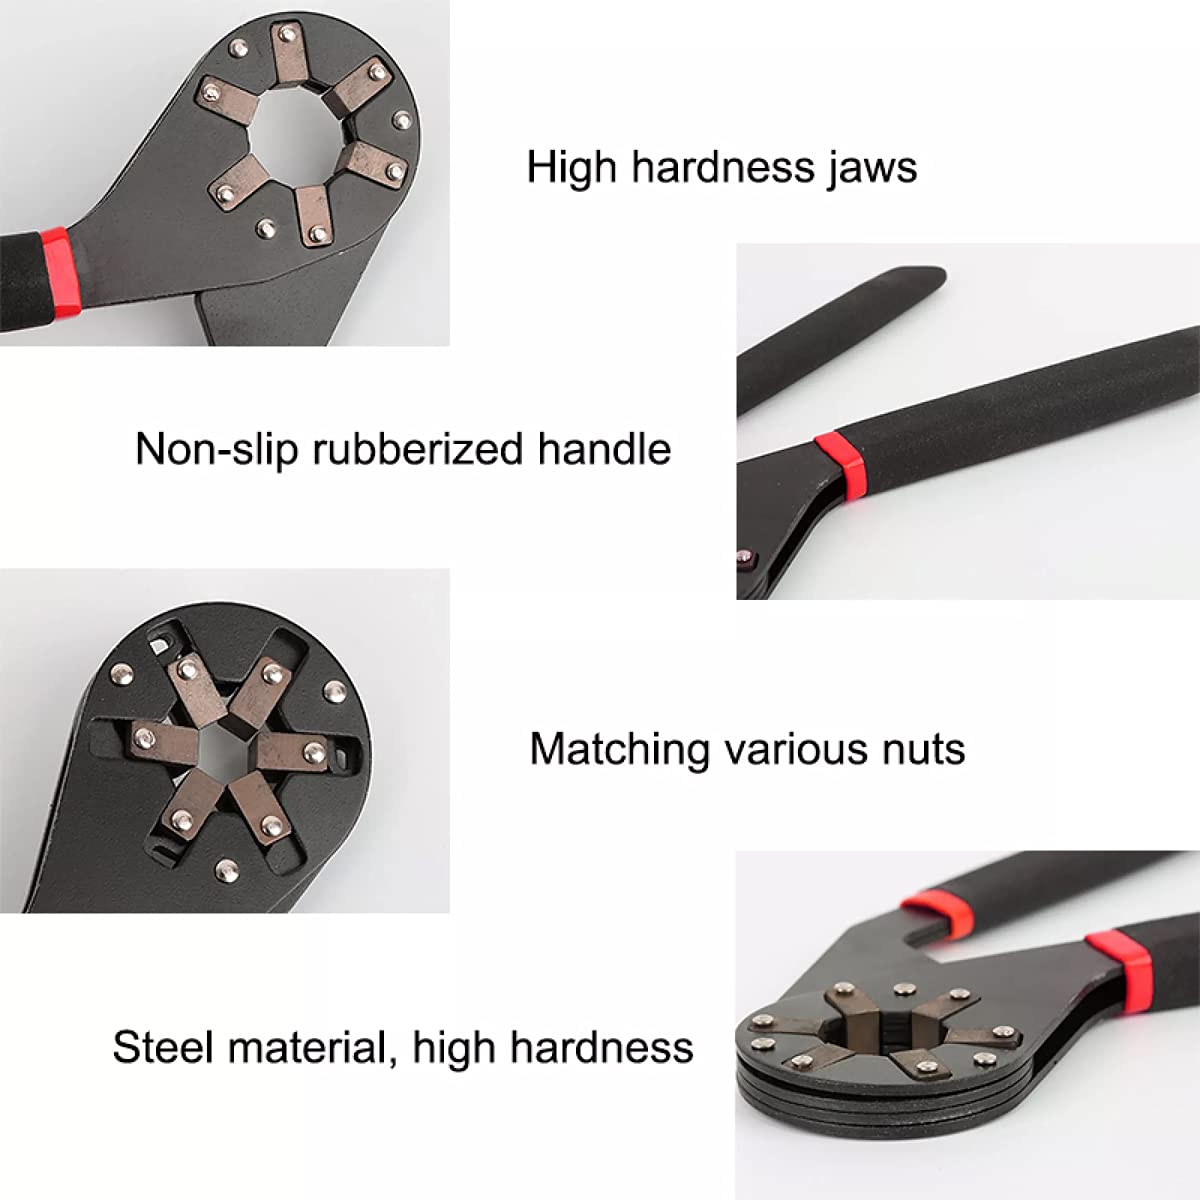 ifferent features of the 6 Inches Universal Magic Wrench, a multifunctional bionic adjustable hexagon spanner